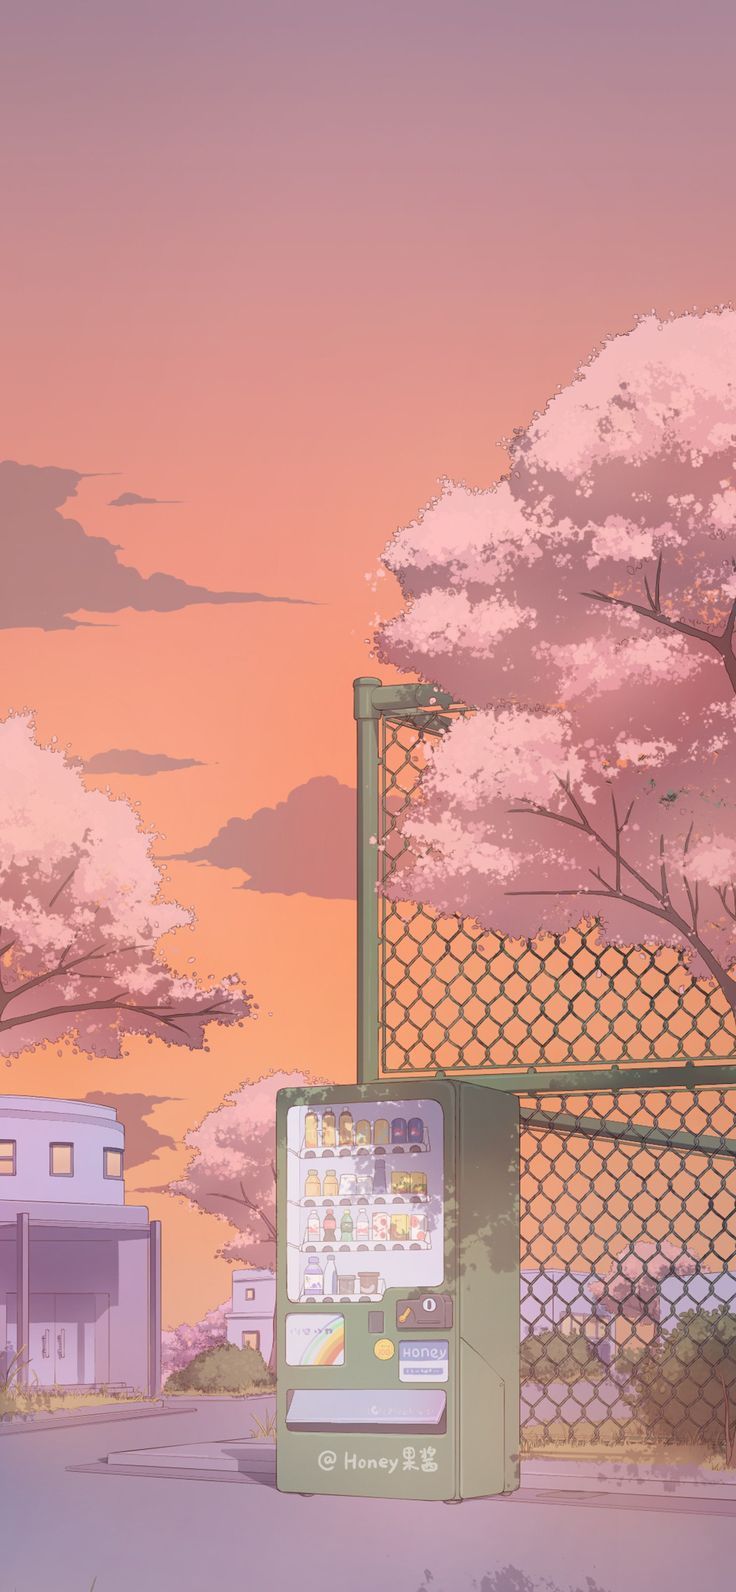 An anime style illustration of a vending machine in a pink sunset - Anime landscape